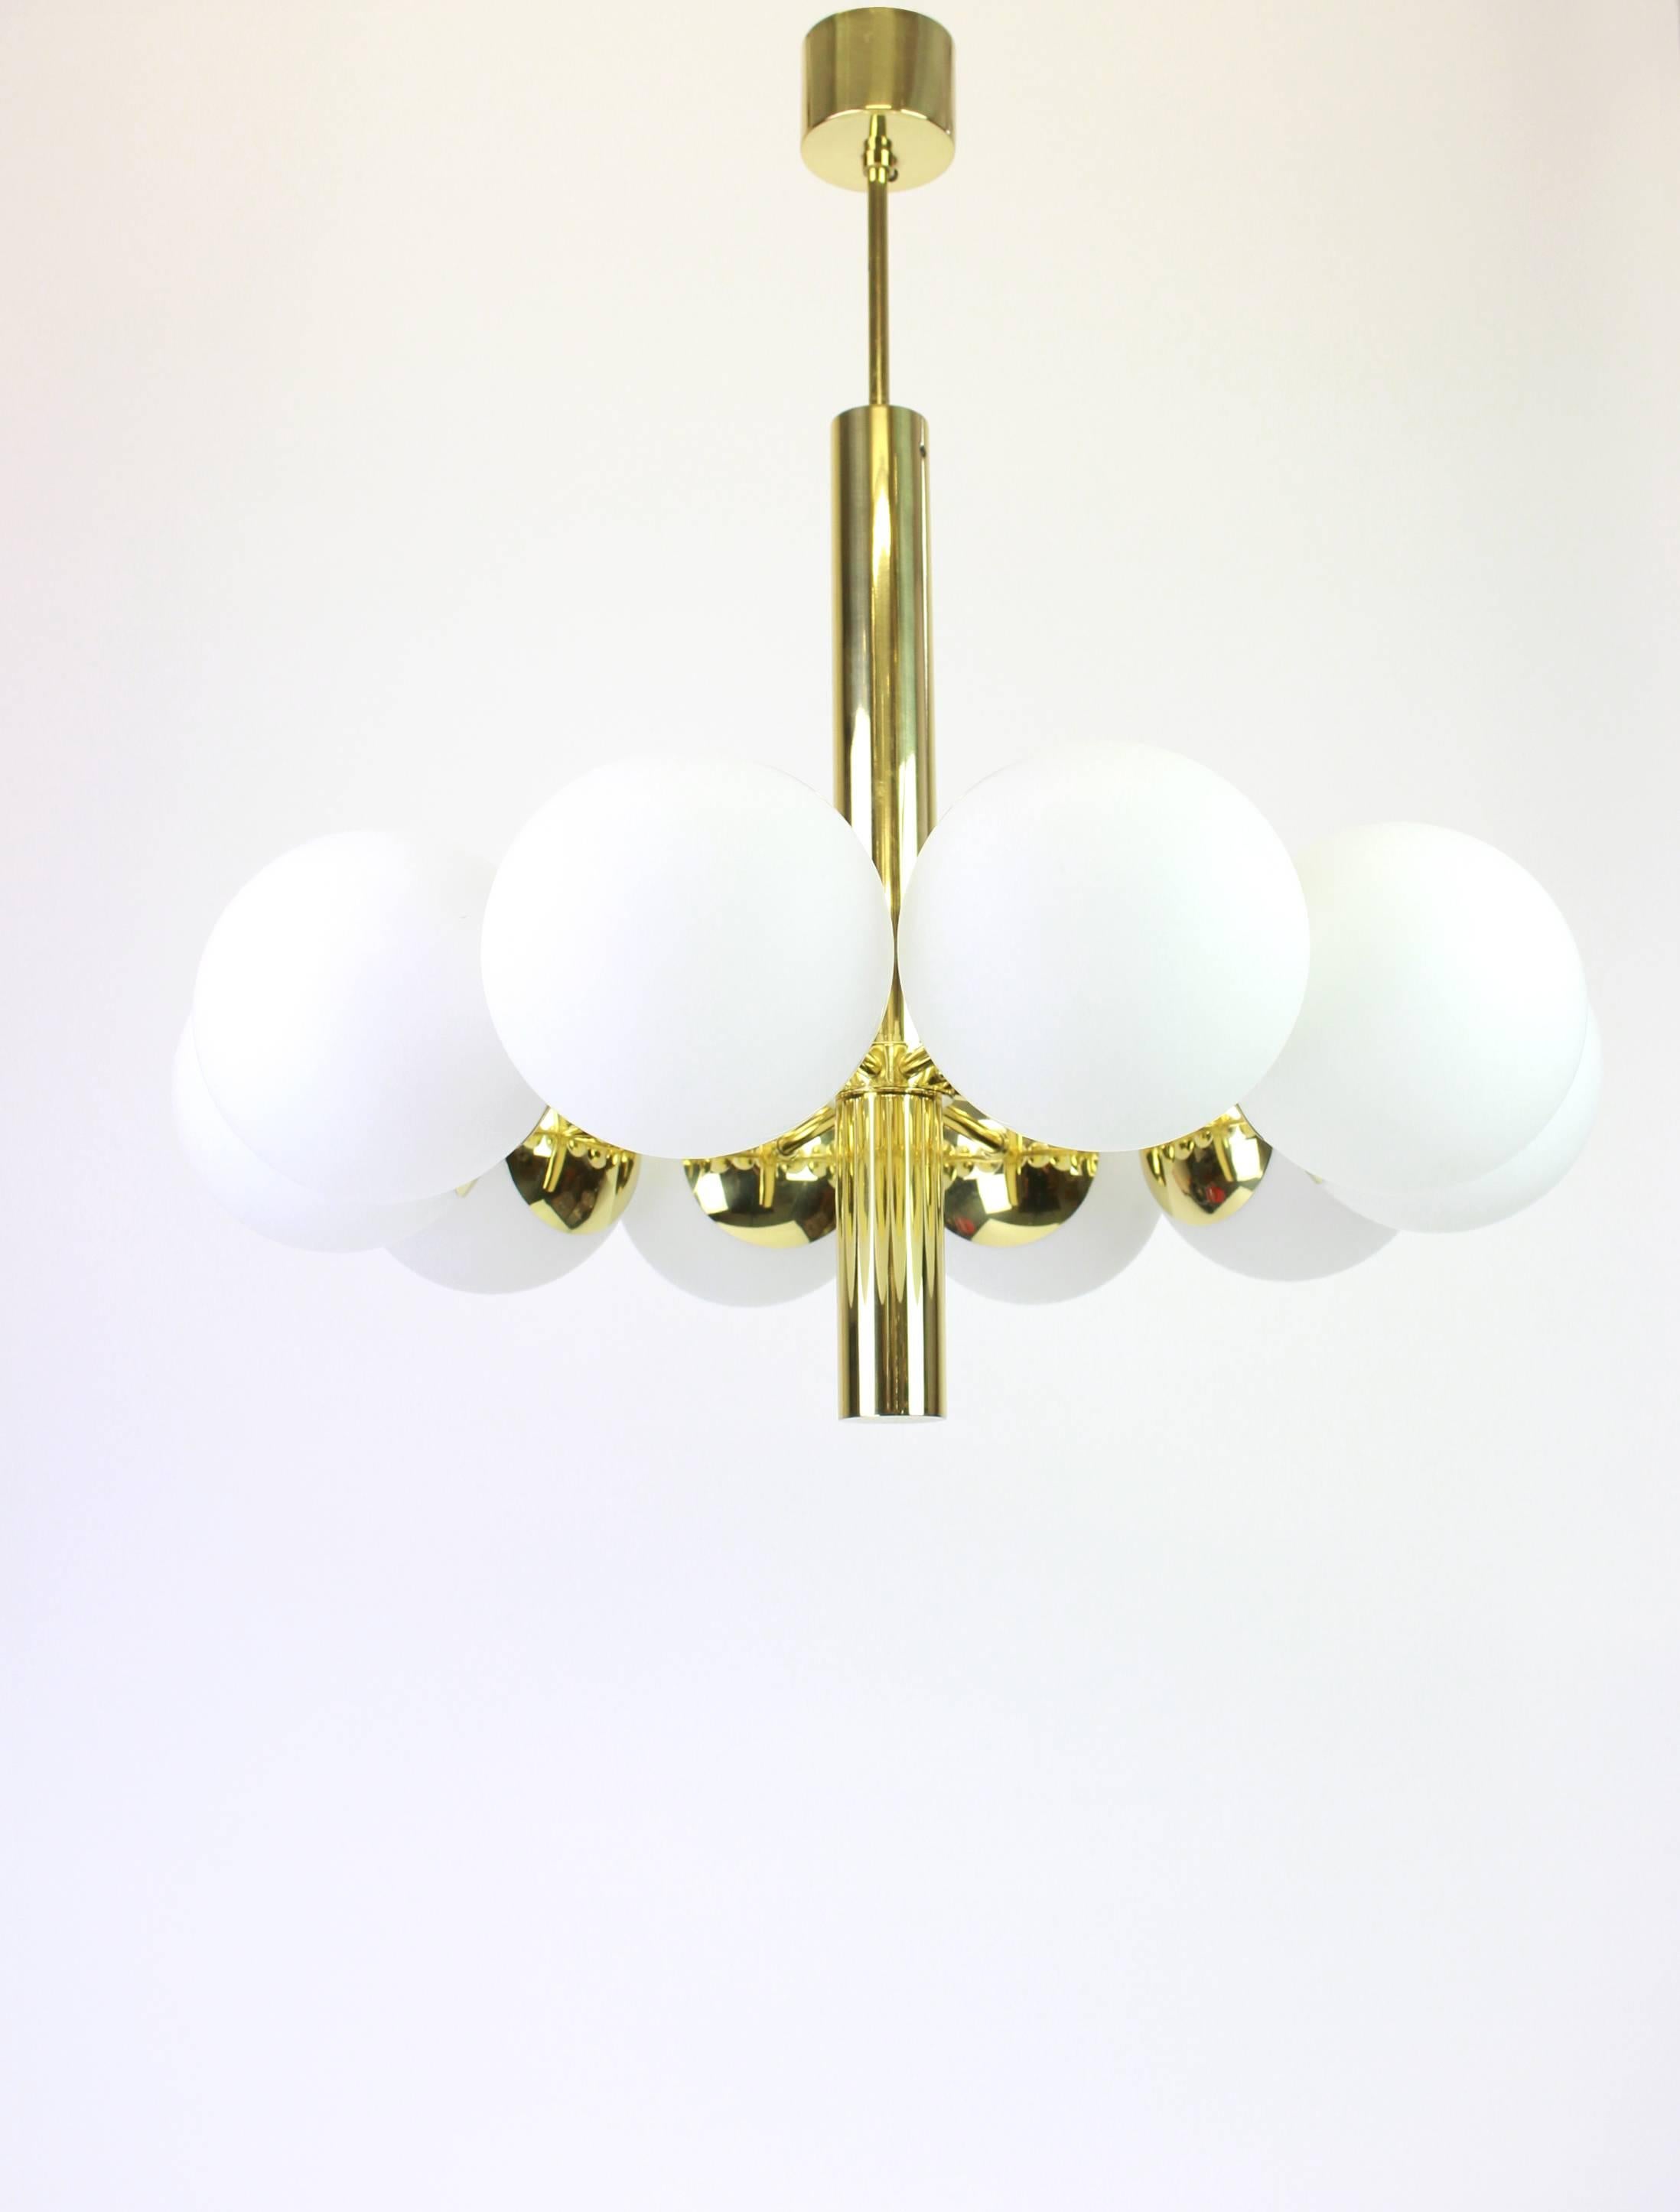 Stunning radial Sputnik brass chandelier with six opal glass globes by Kaiser Leuchten, Germany, 1960s.

High quality and in very good condition. Cleaned, well-wired and ready to use. 

The fixture requires 10 x E14 standard bulbs with 40W max each